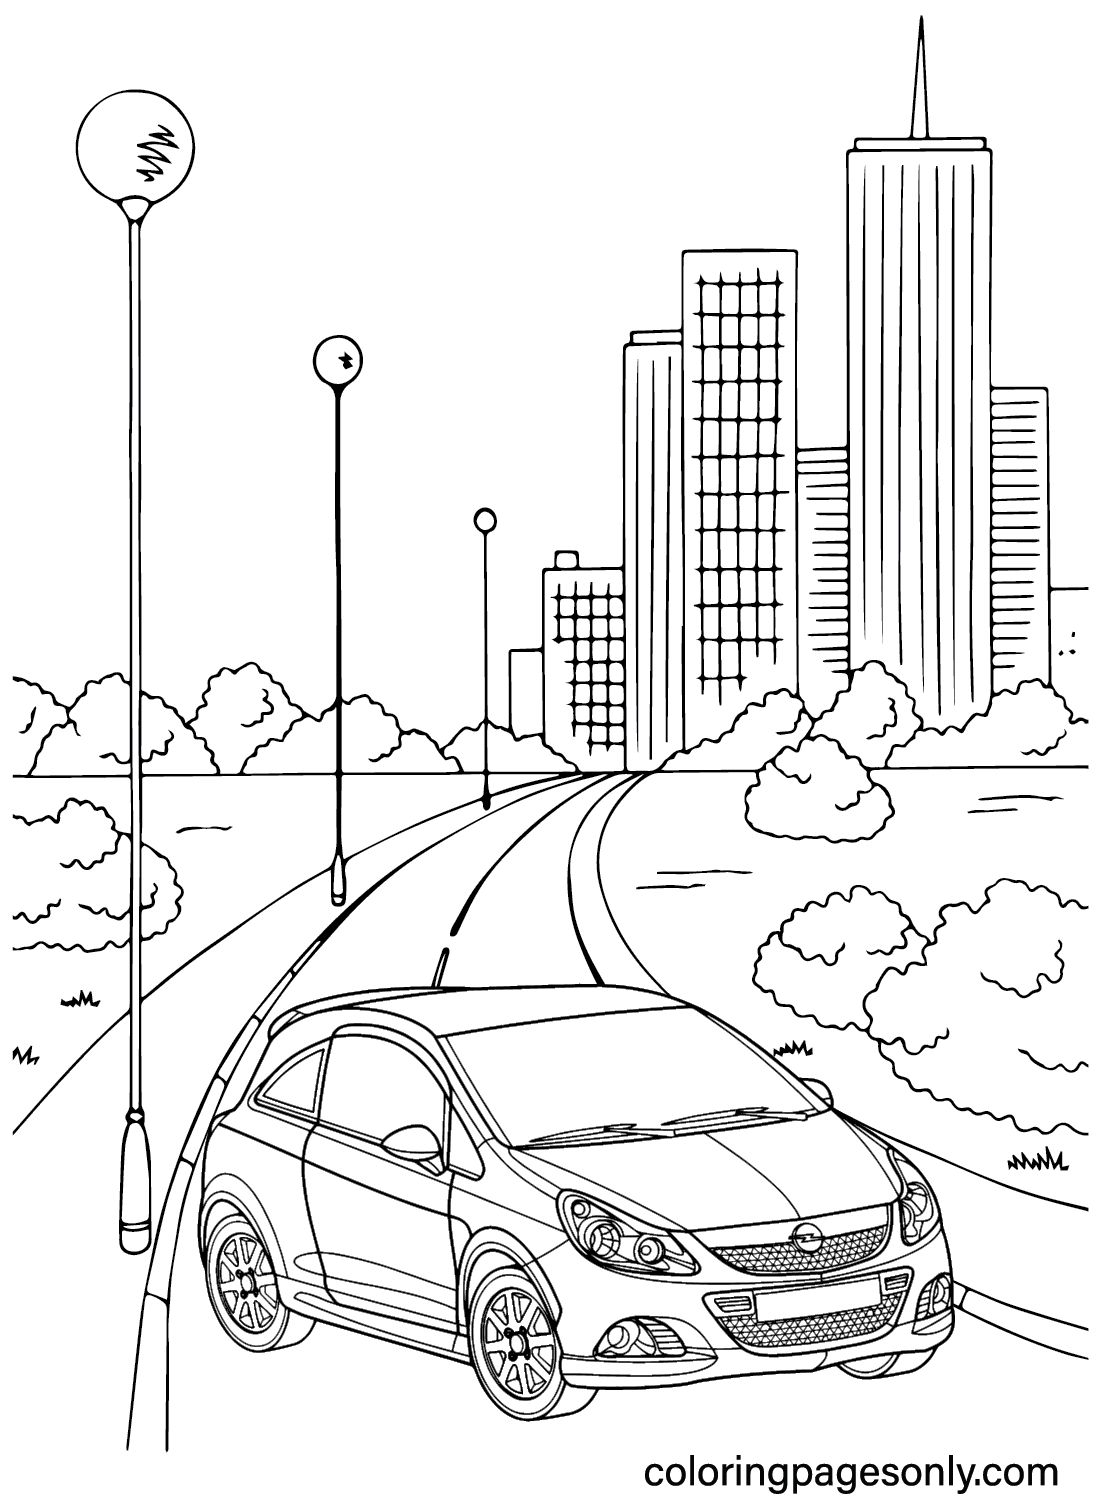 Opel Corsa OPC Coloring Page from Opel